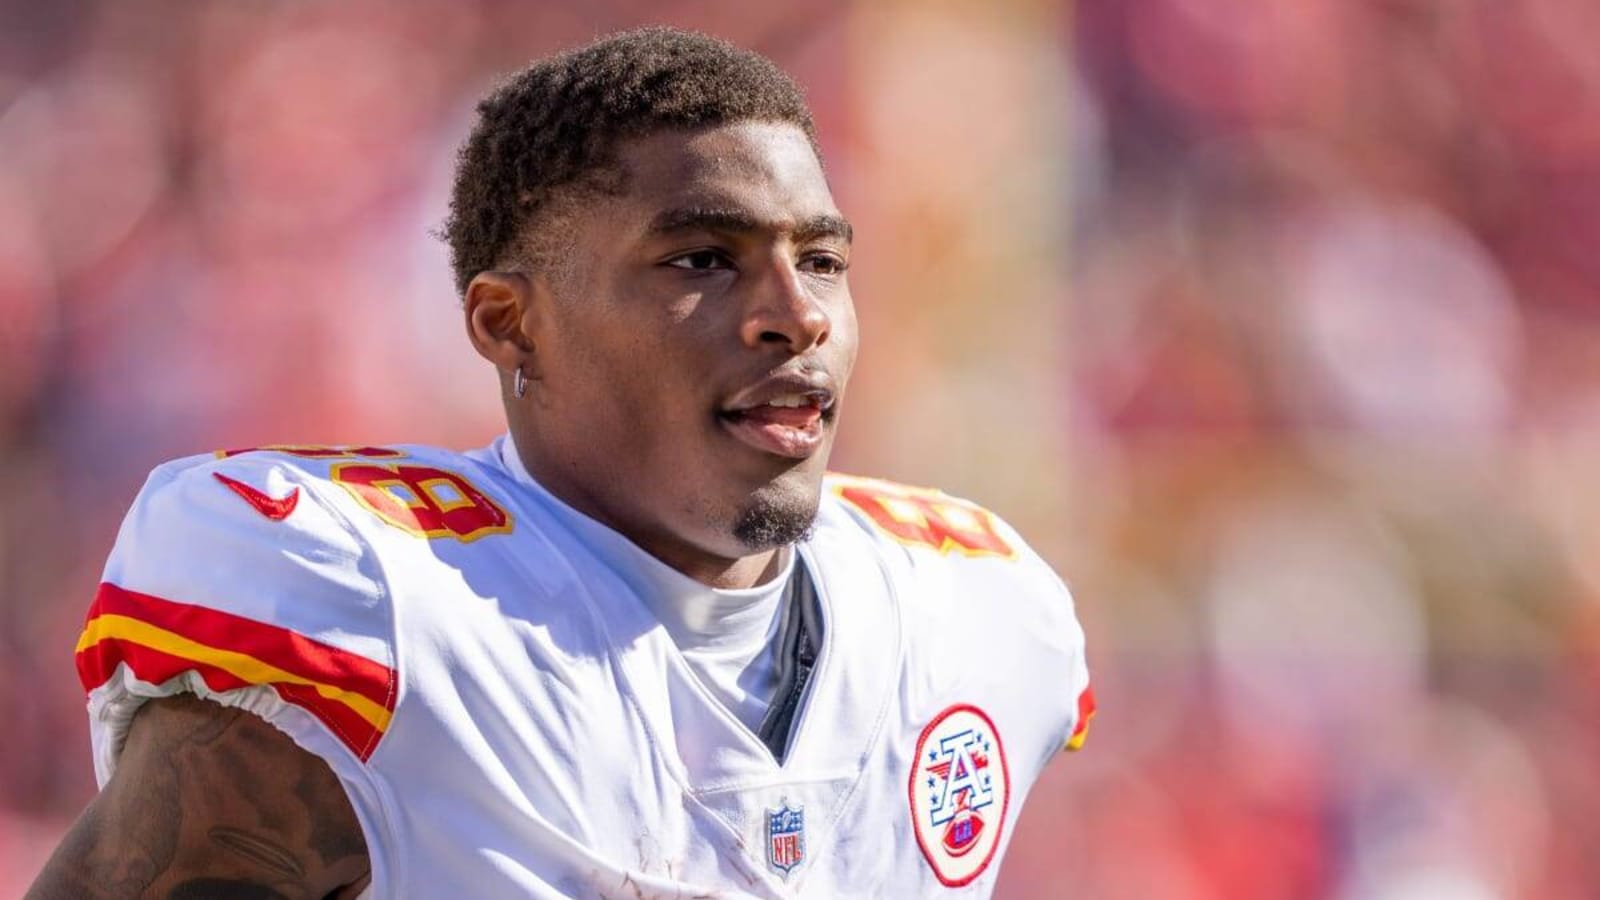 Chiefs Injury Updates: Jody Fortson, Drue Tranquill and Mike Danna Leave Practice